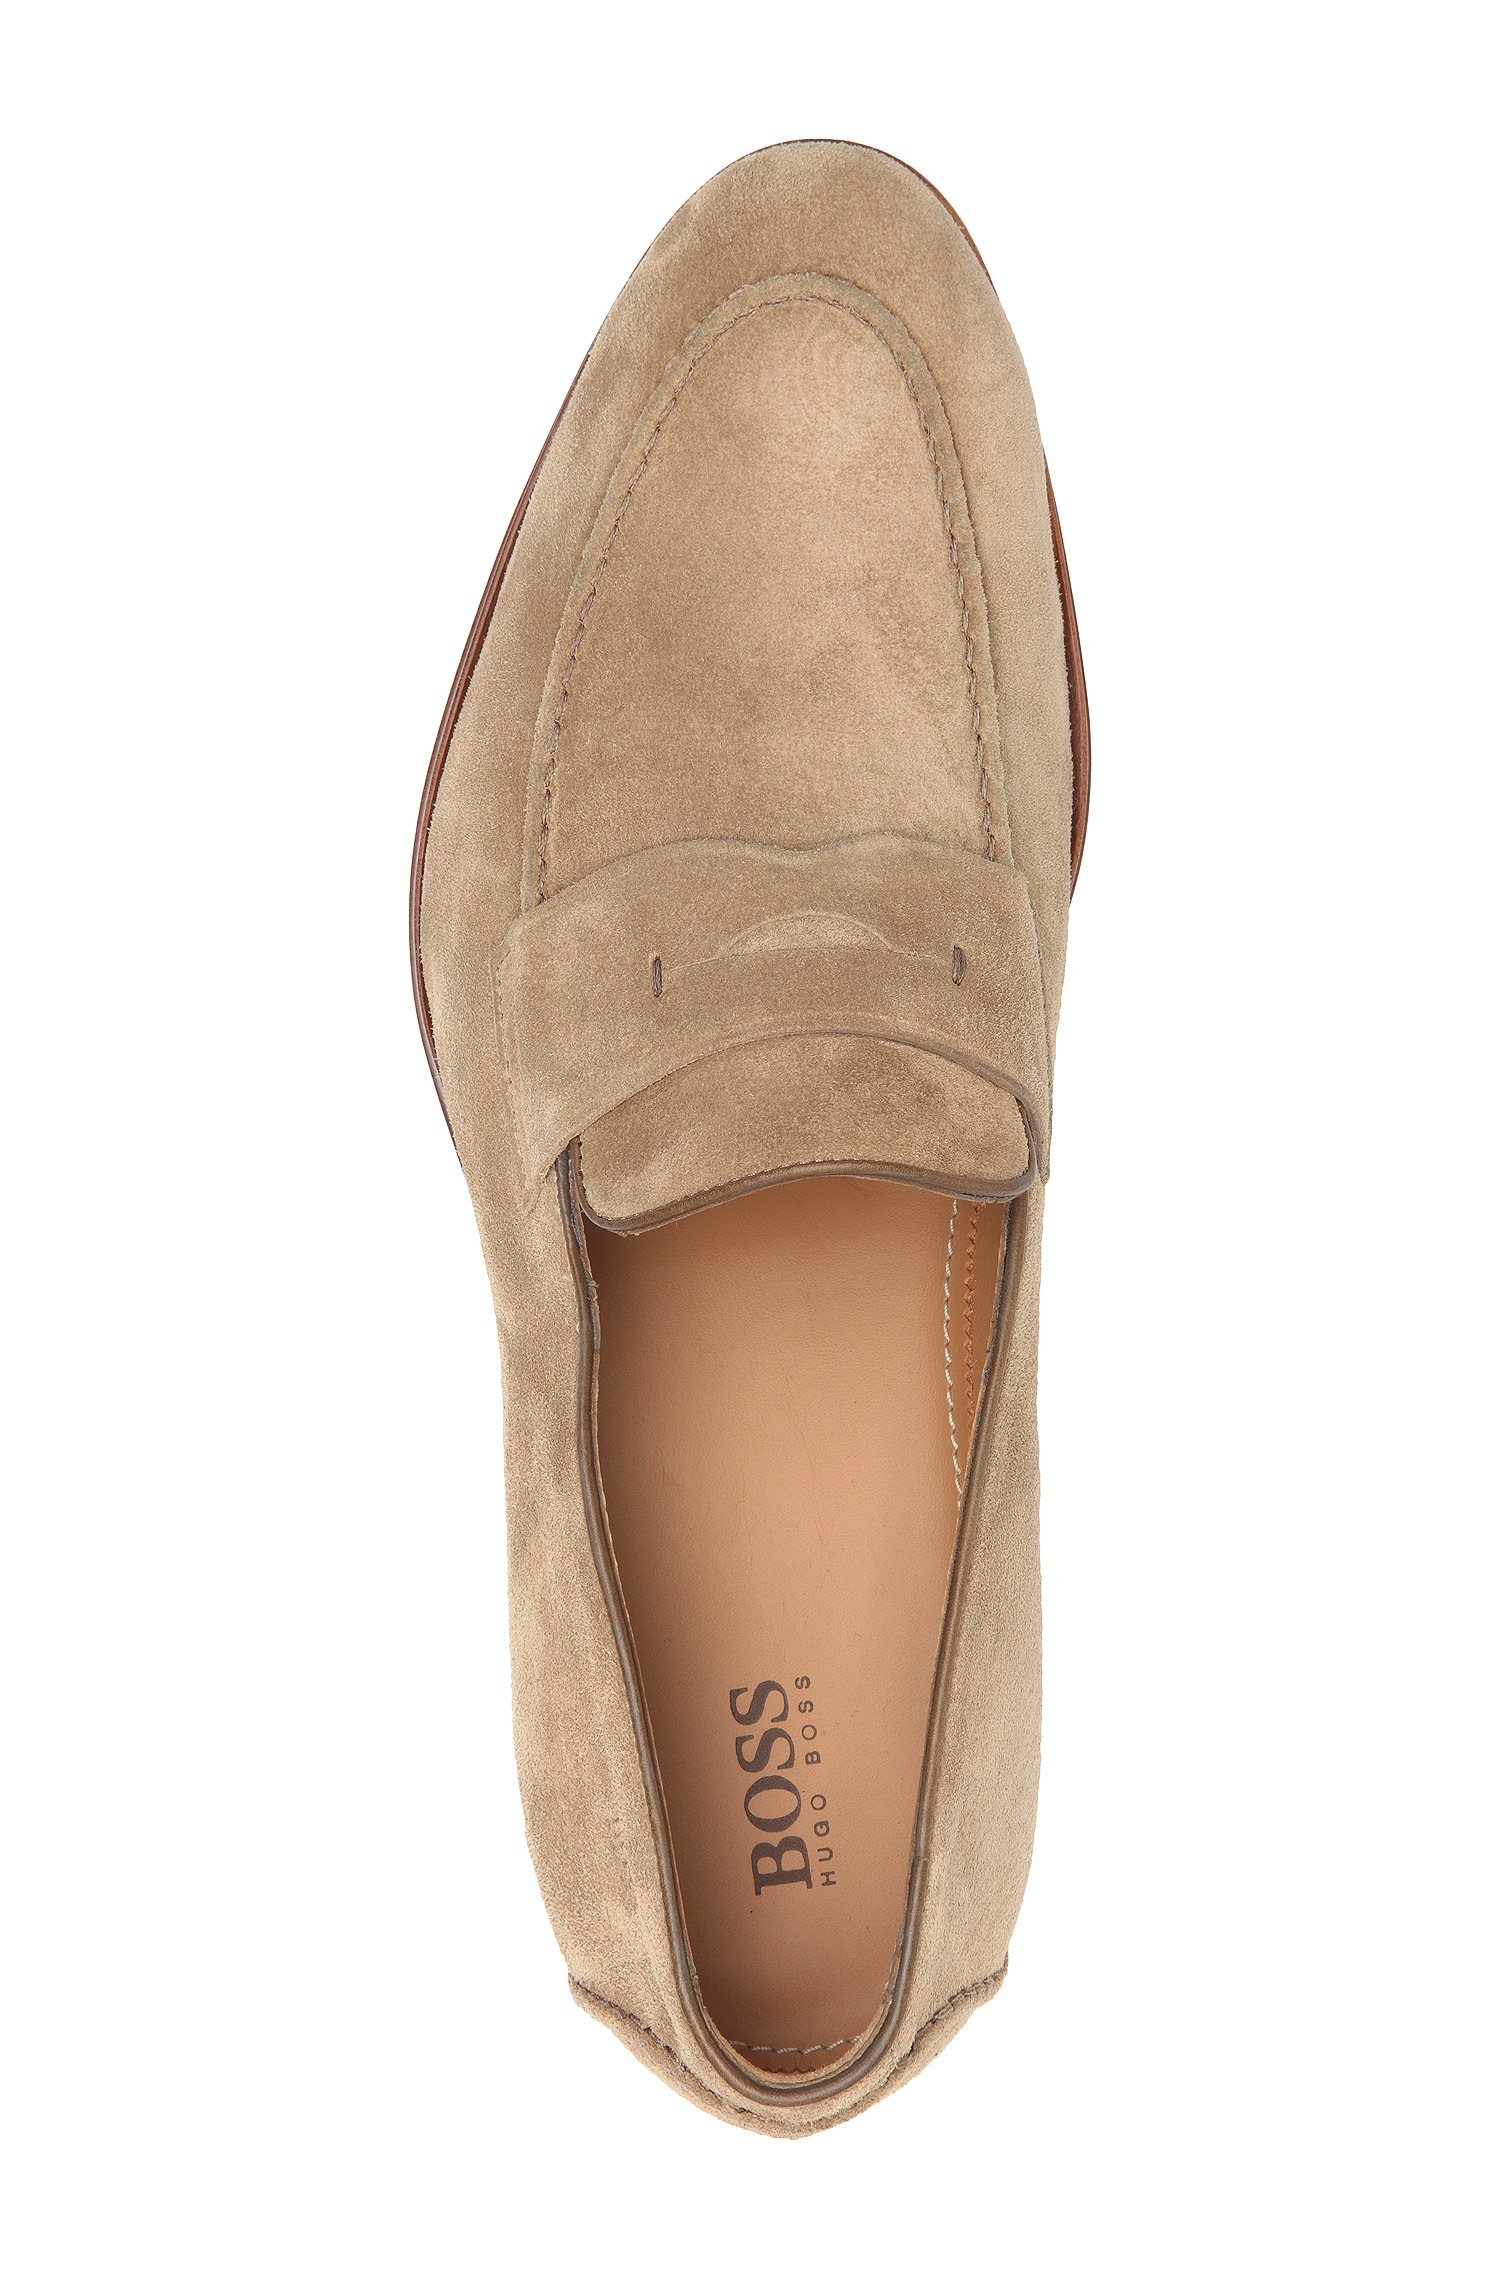 BOSS by HUGO BOSS 'Stedeo' | Italian Suede Penny Loafer in Natural for Men  | Lyst